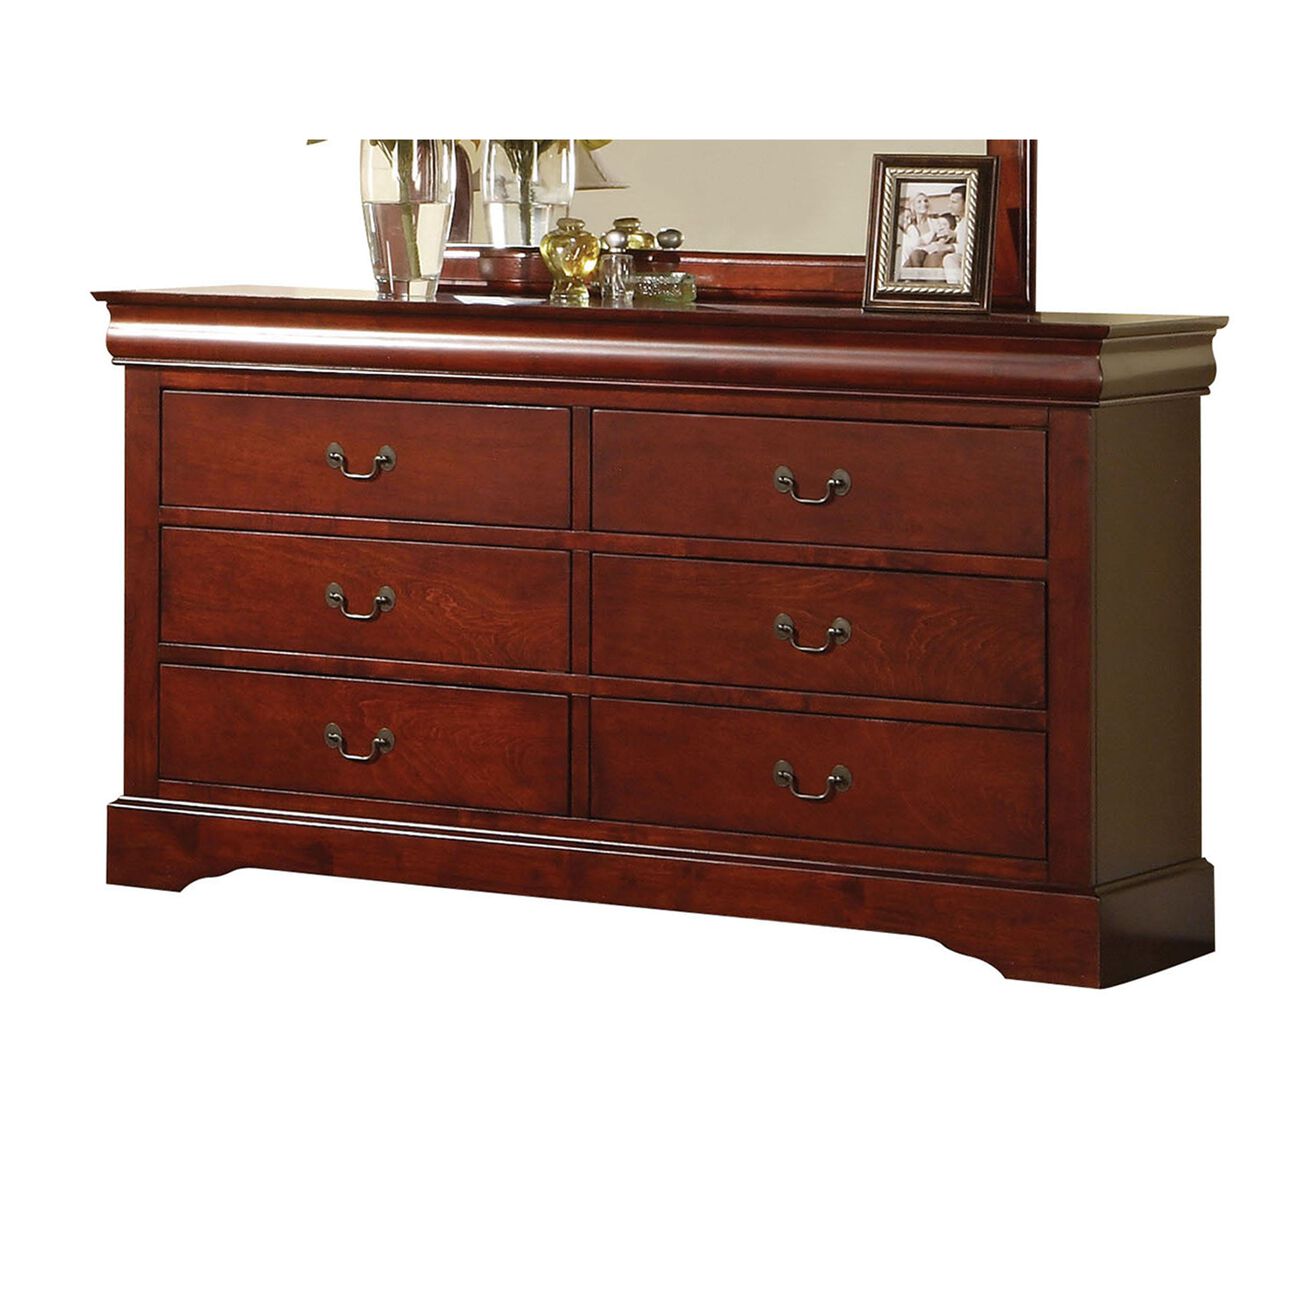 Wooden Dresser With Six Drawers , Cherry Brown